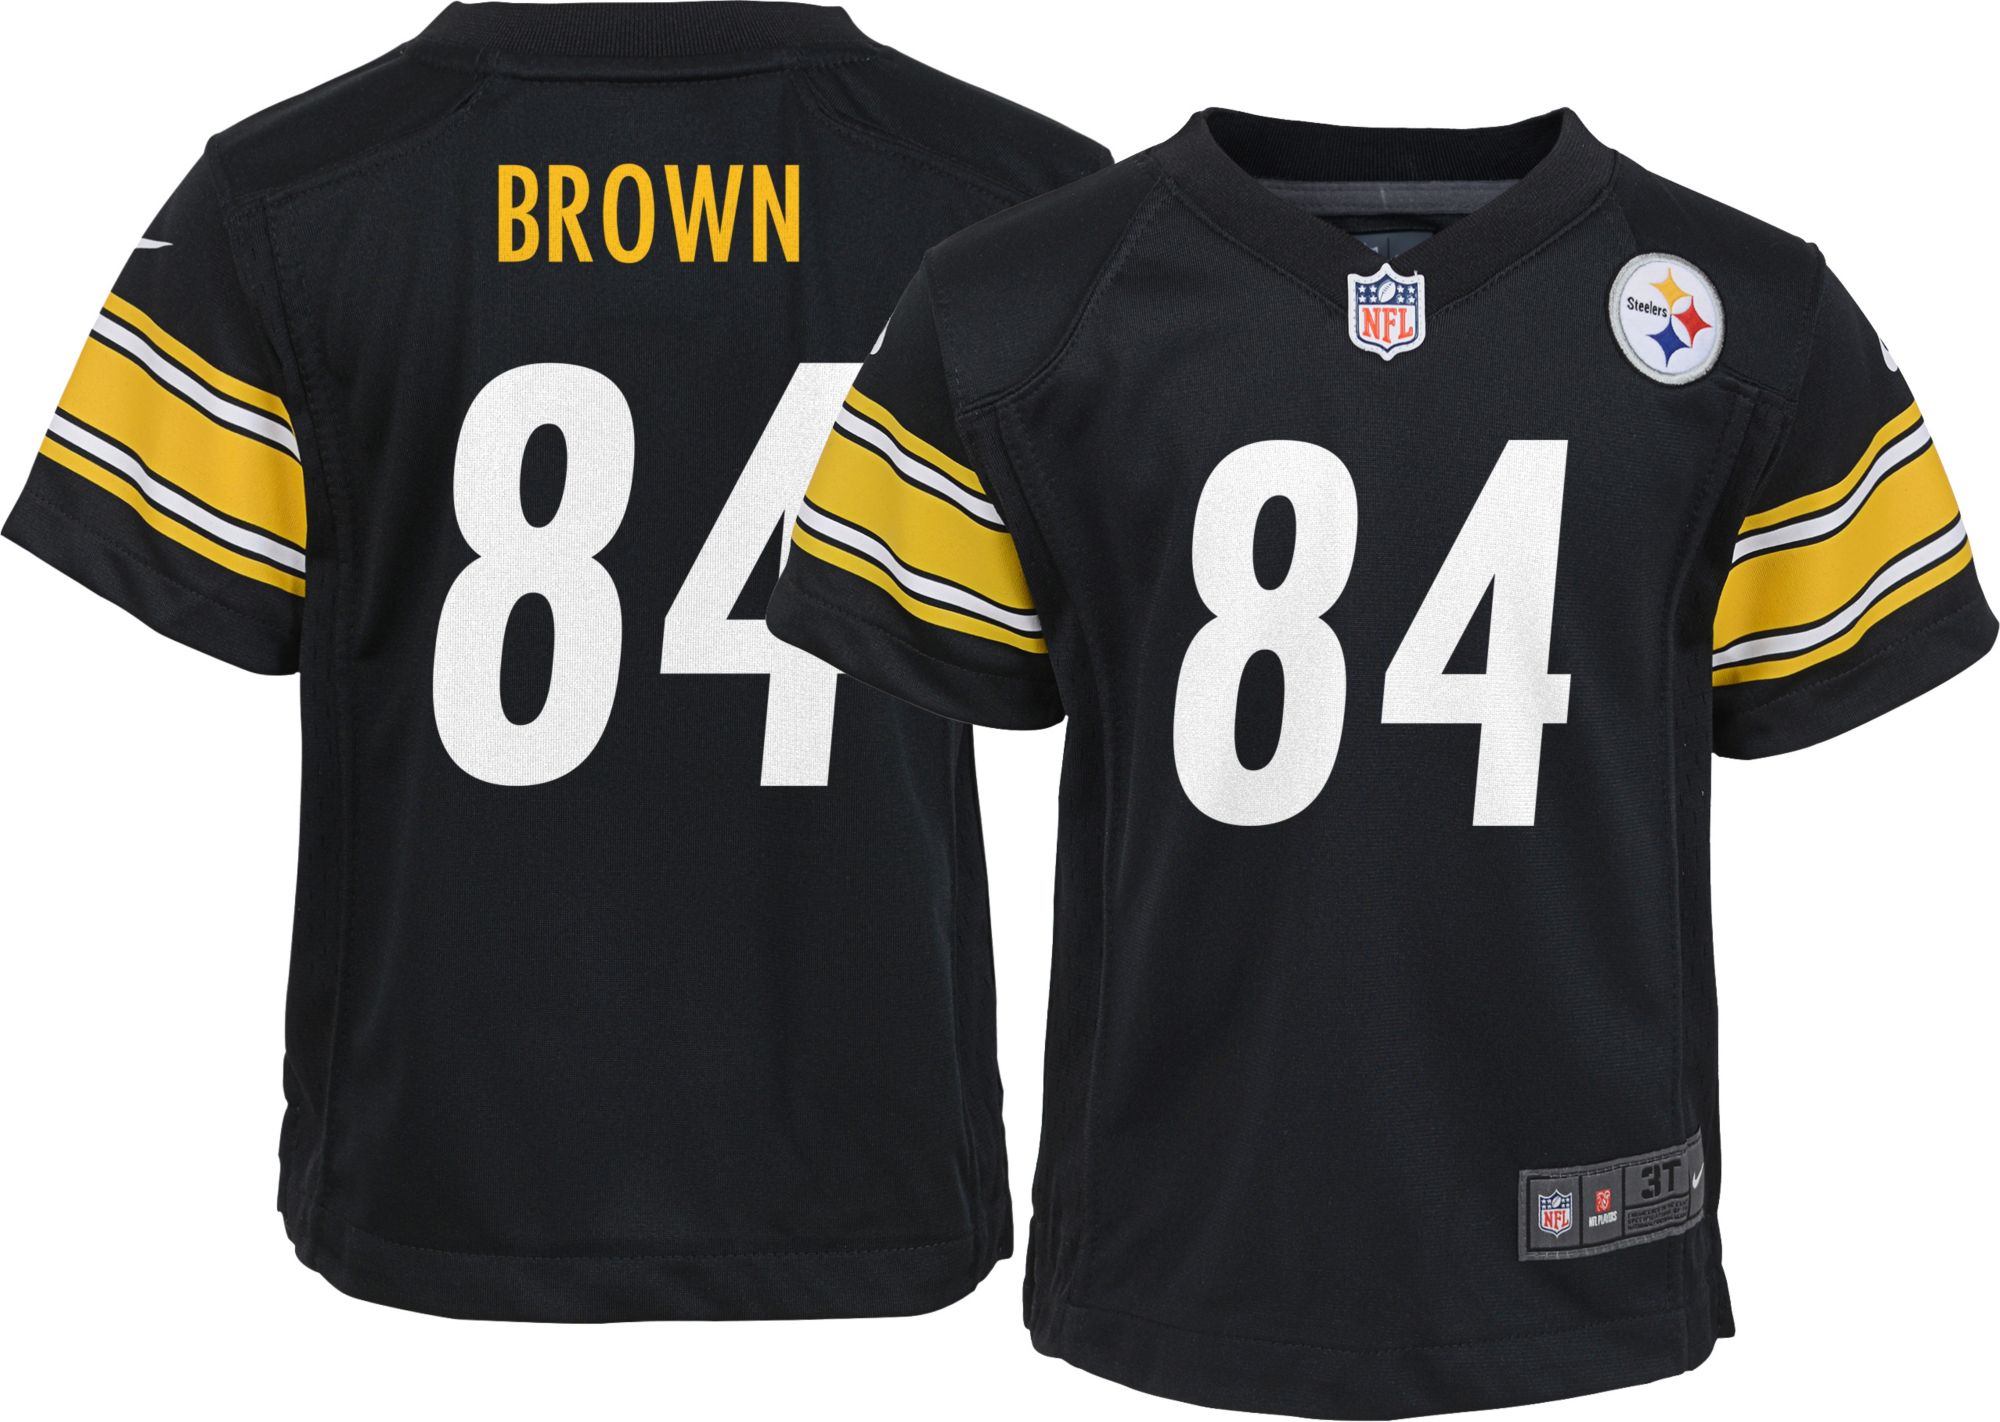 Toddler Pittsburgh Steelers Jerseys 